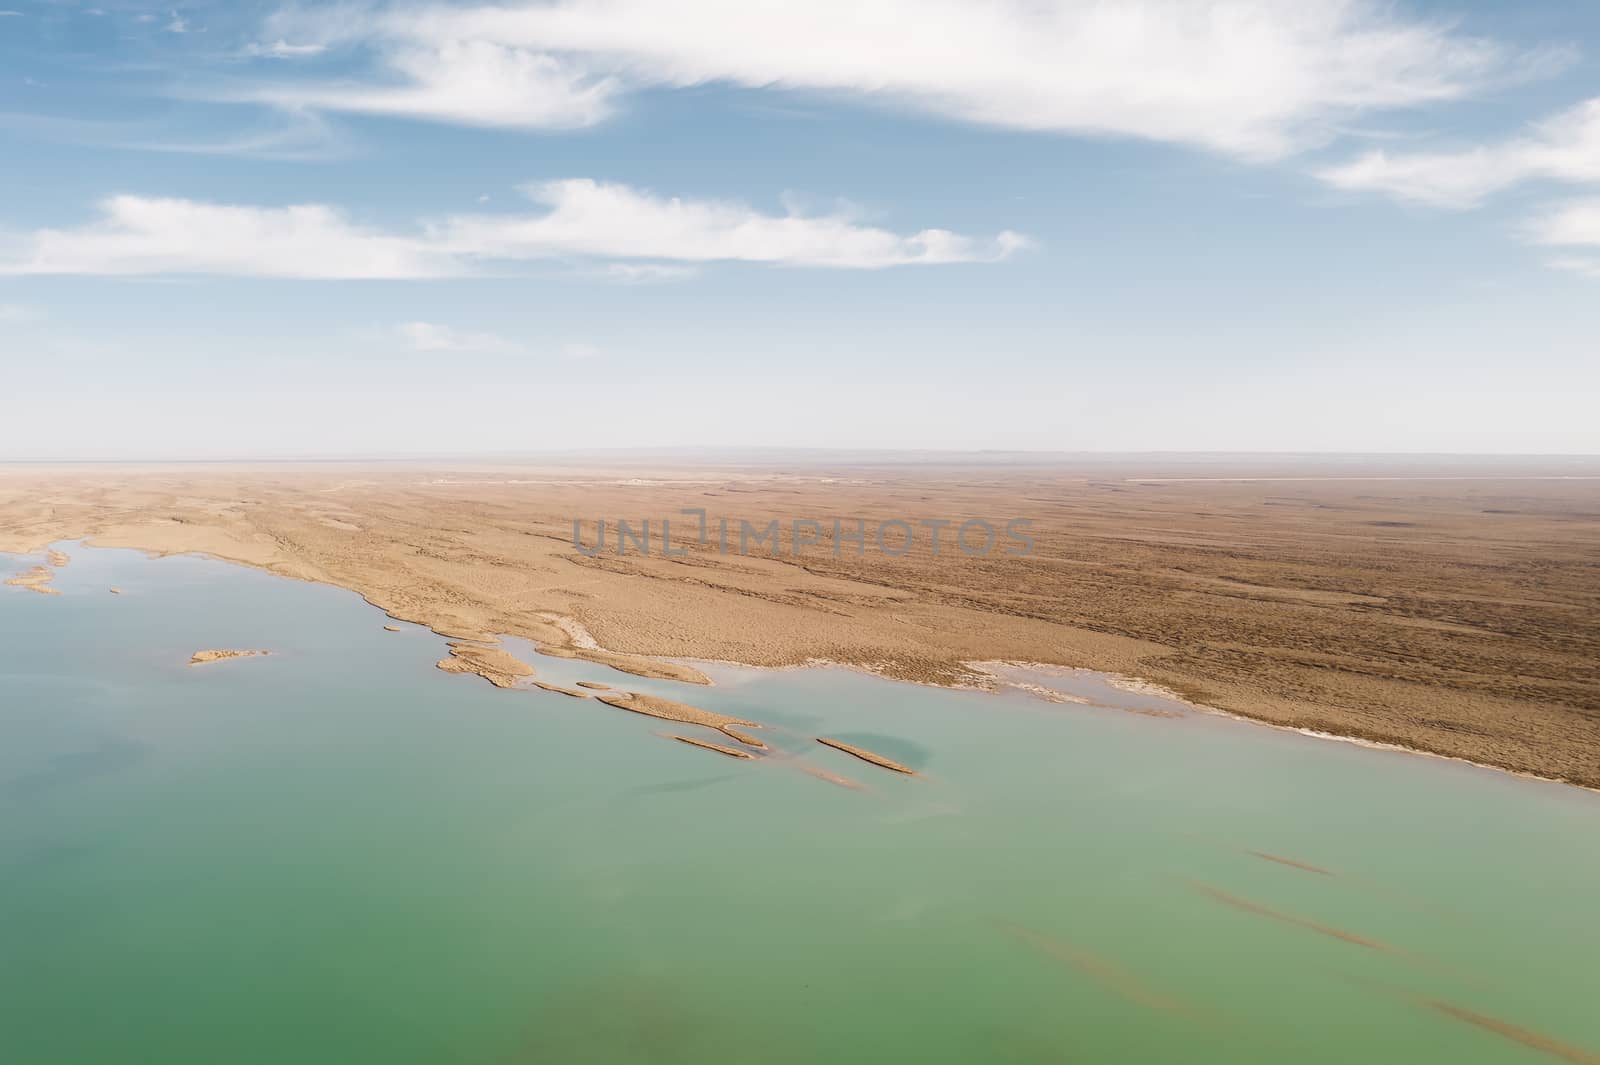 Clean lake and blue sky, natural background. Photo in Qinghai, China.